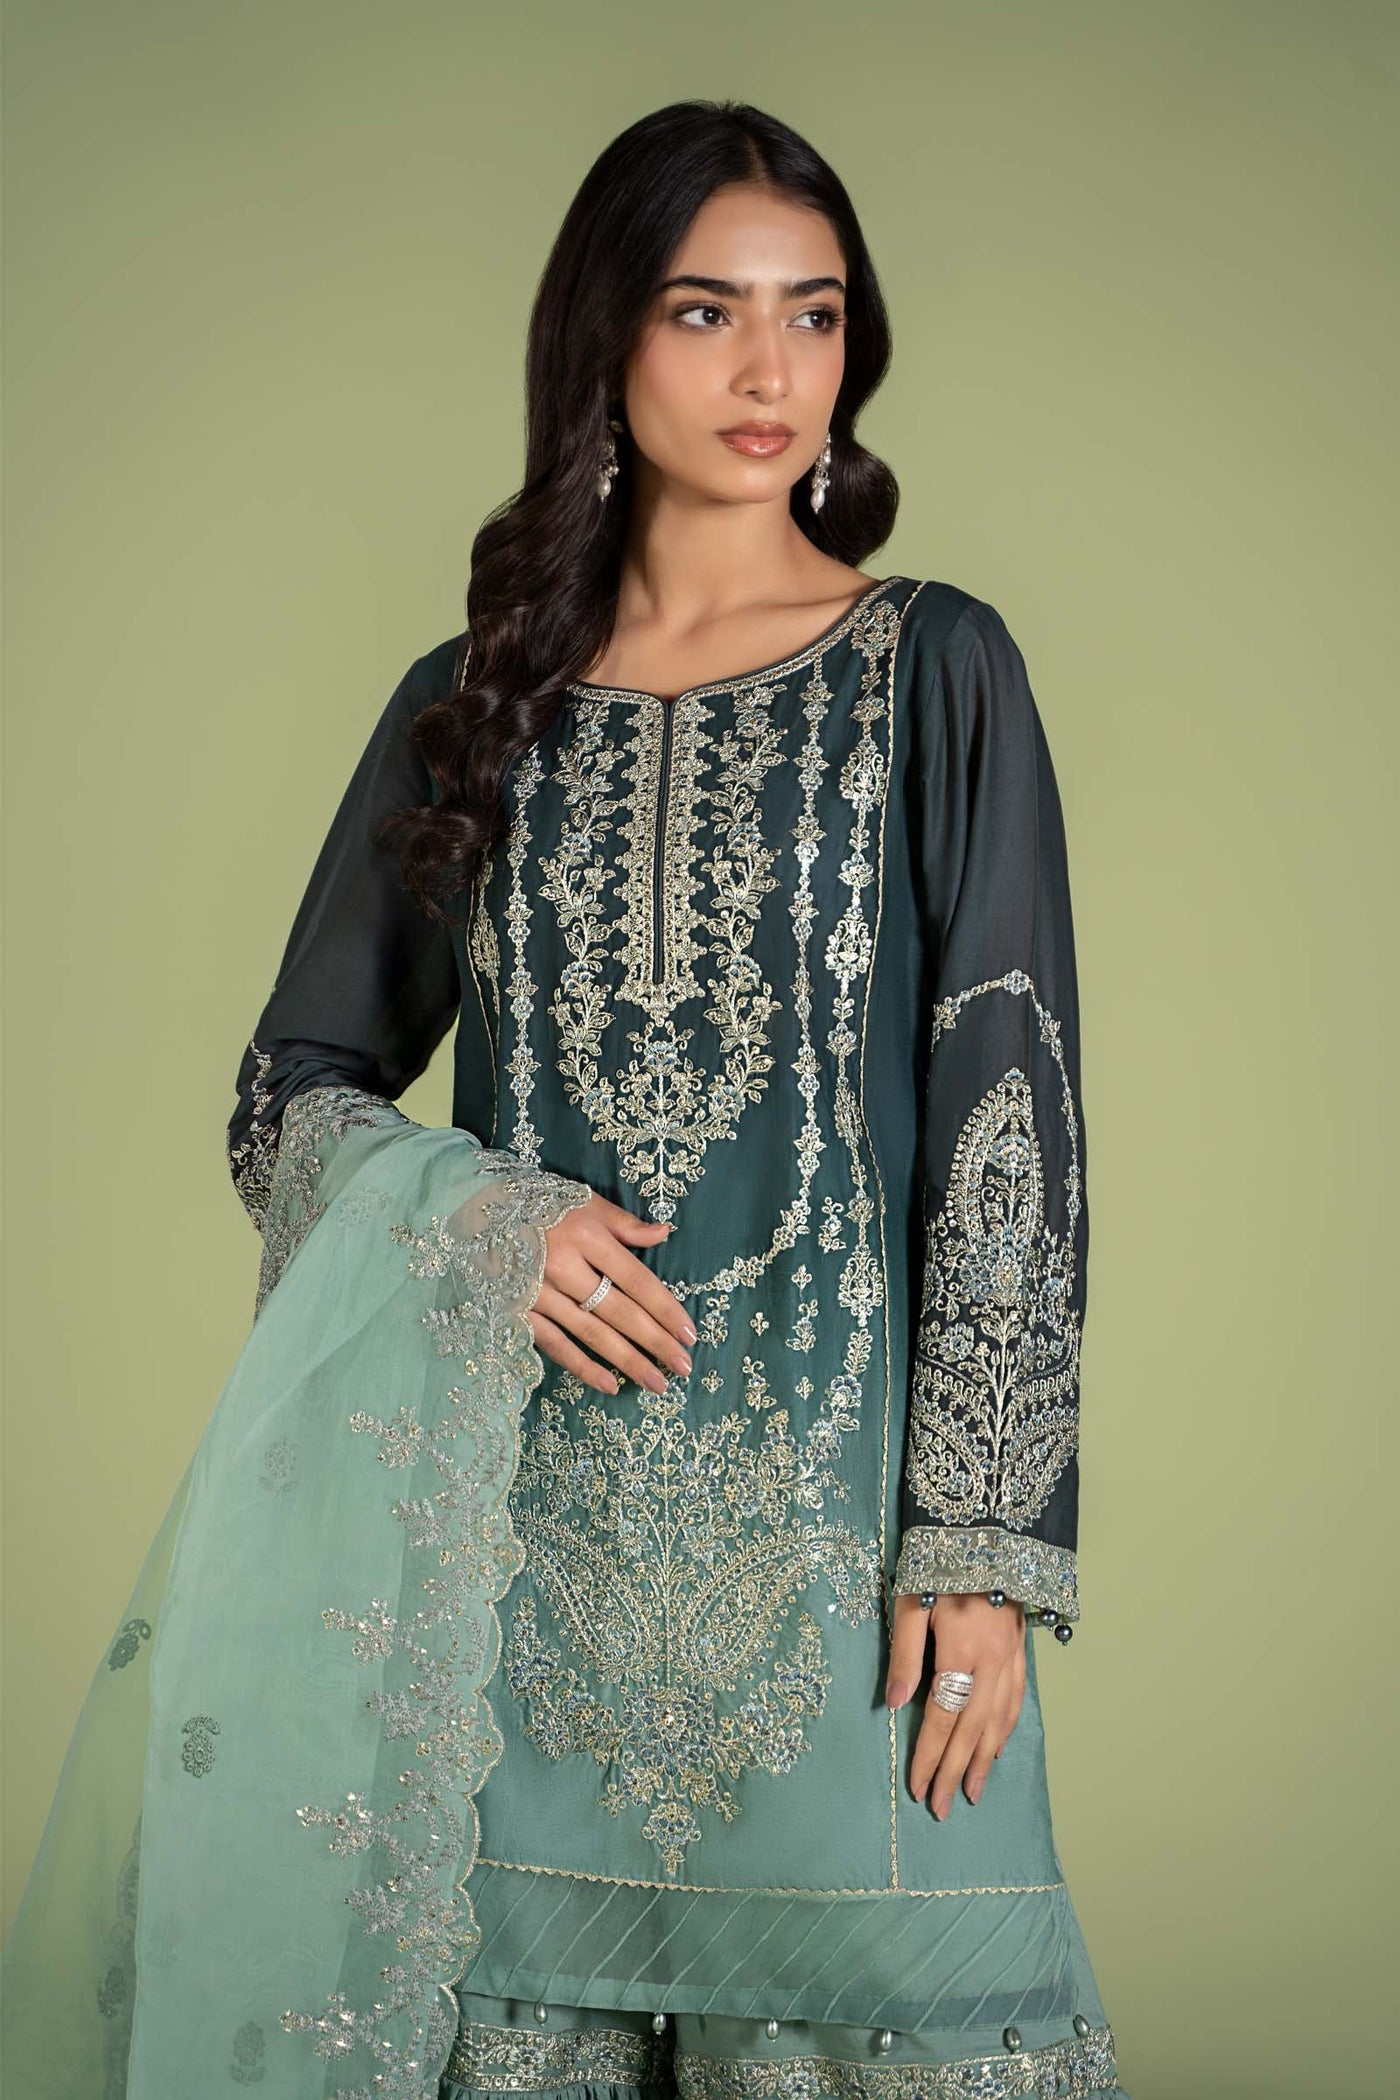 3 PIECE EMBROIDERED LAWN SUIT | DW-EF24-46 – Maria.B. Designs (AE)